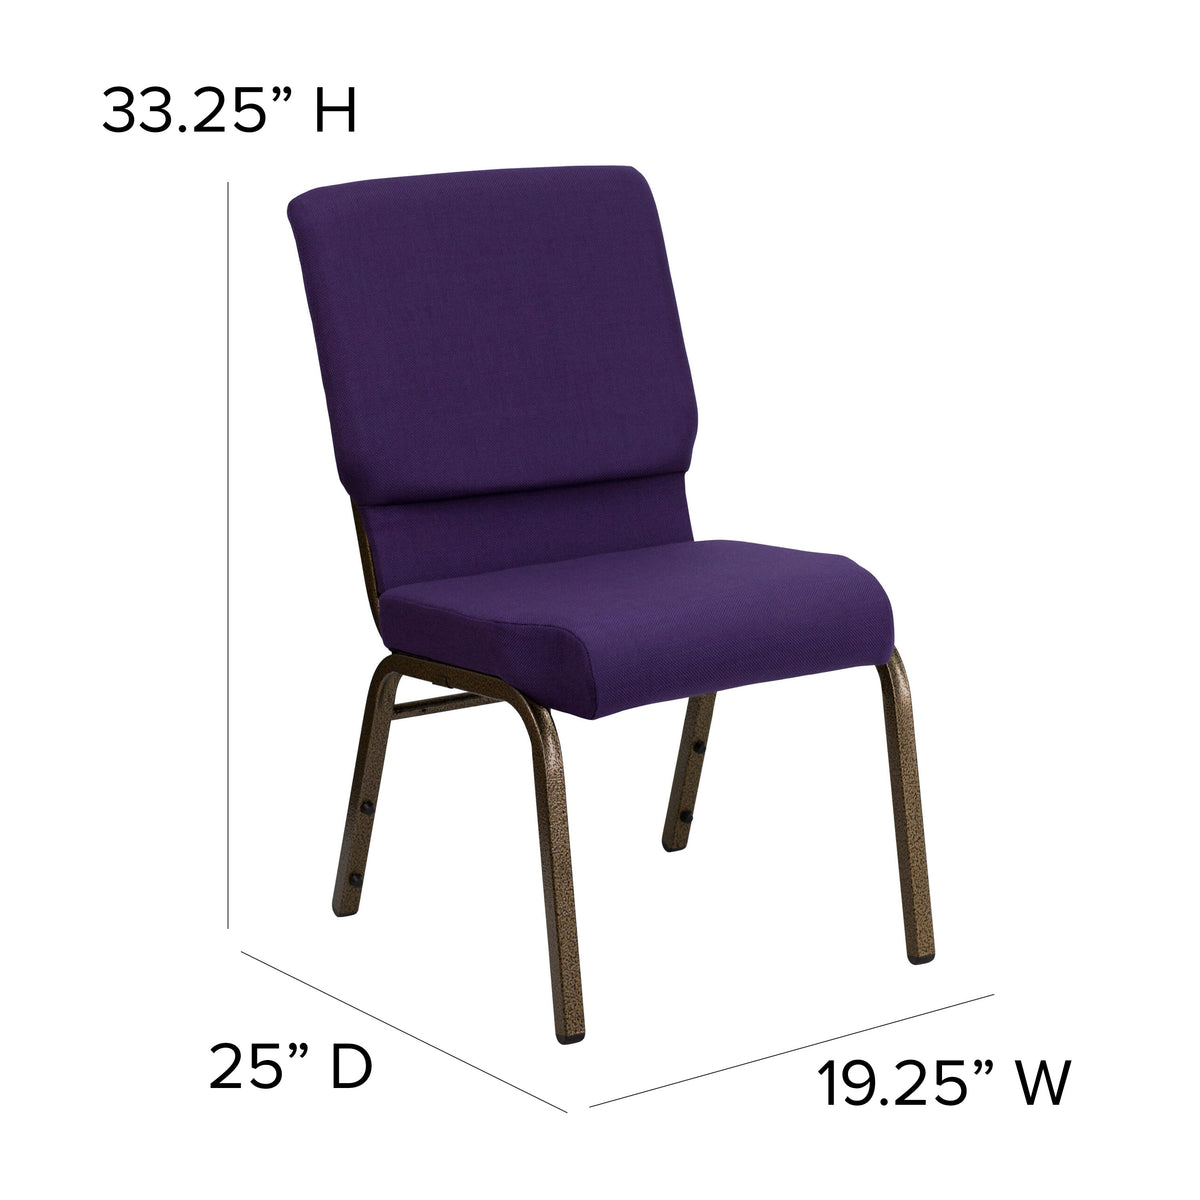 Stacking Auditorium Chair with 19inch Seat - Royal Purple Fabric/Gold Vein Frame